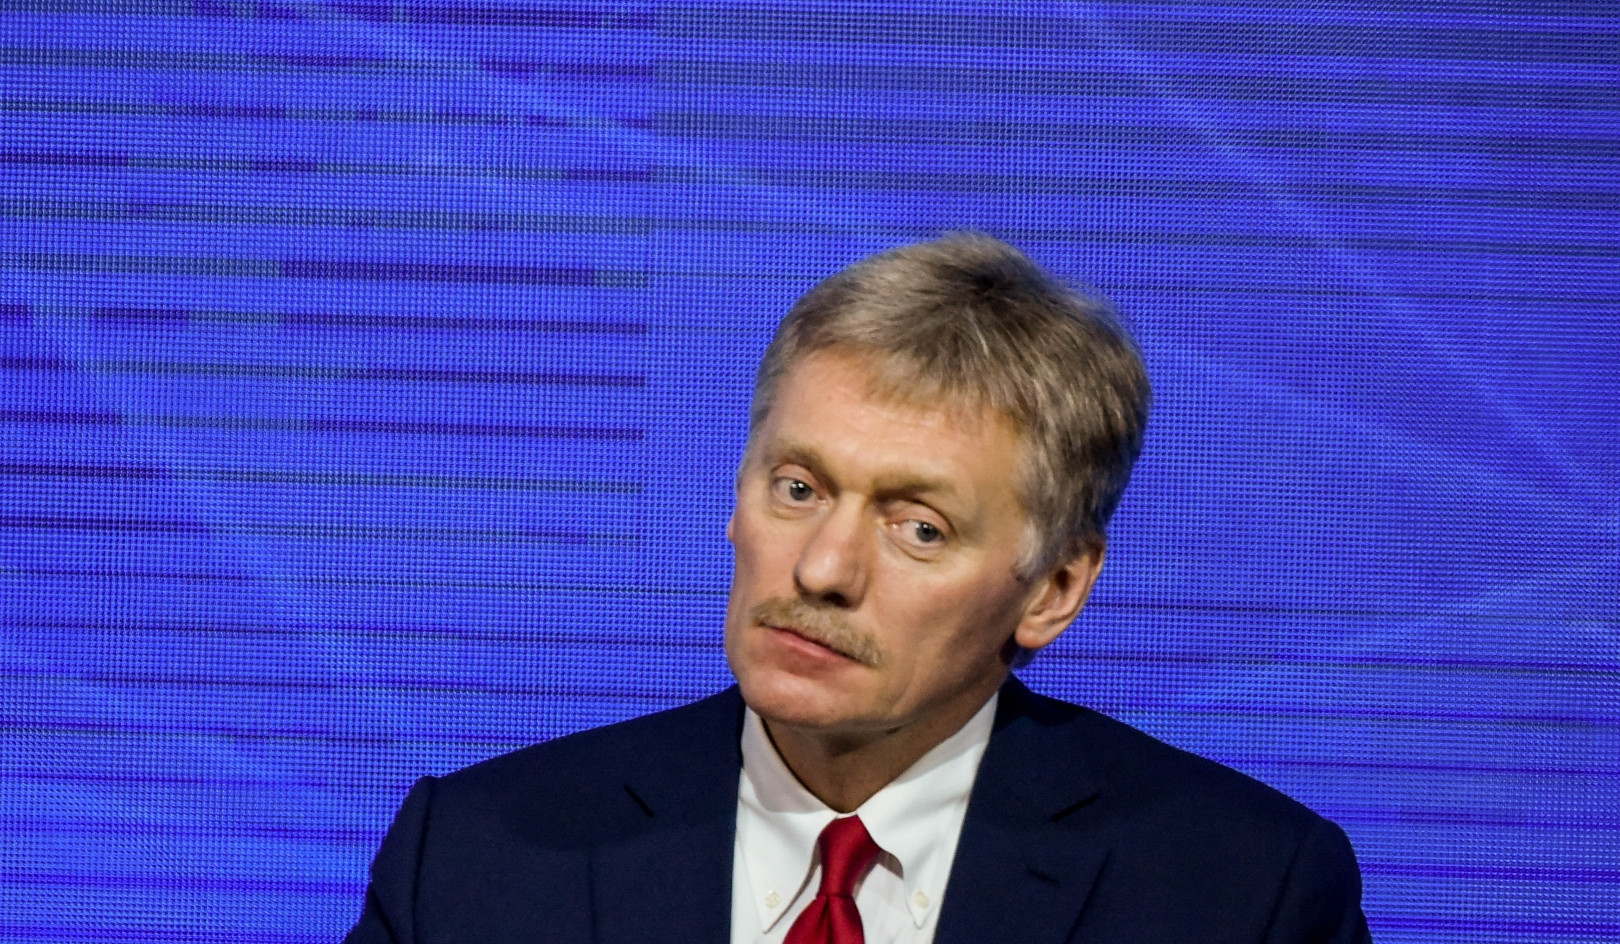 No payment, no gas: Peskov on disagreements over payment for gas in rubles